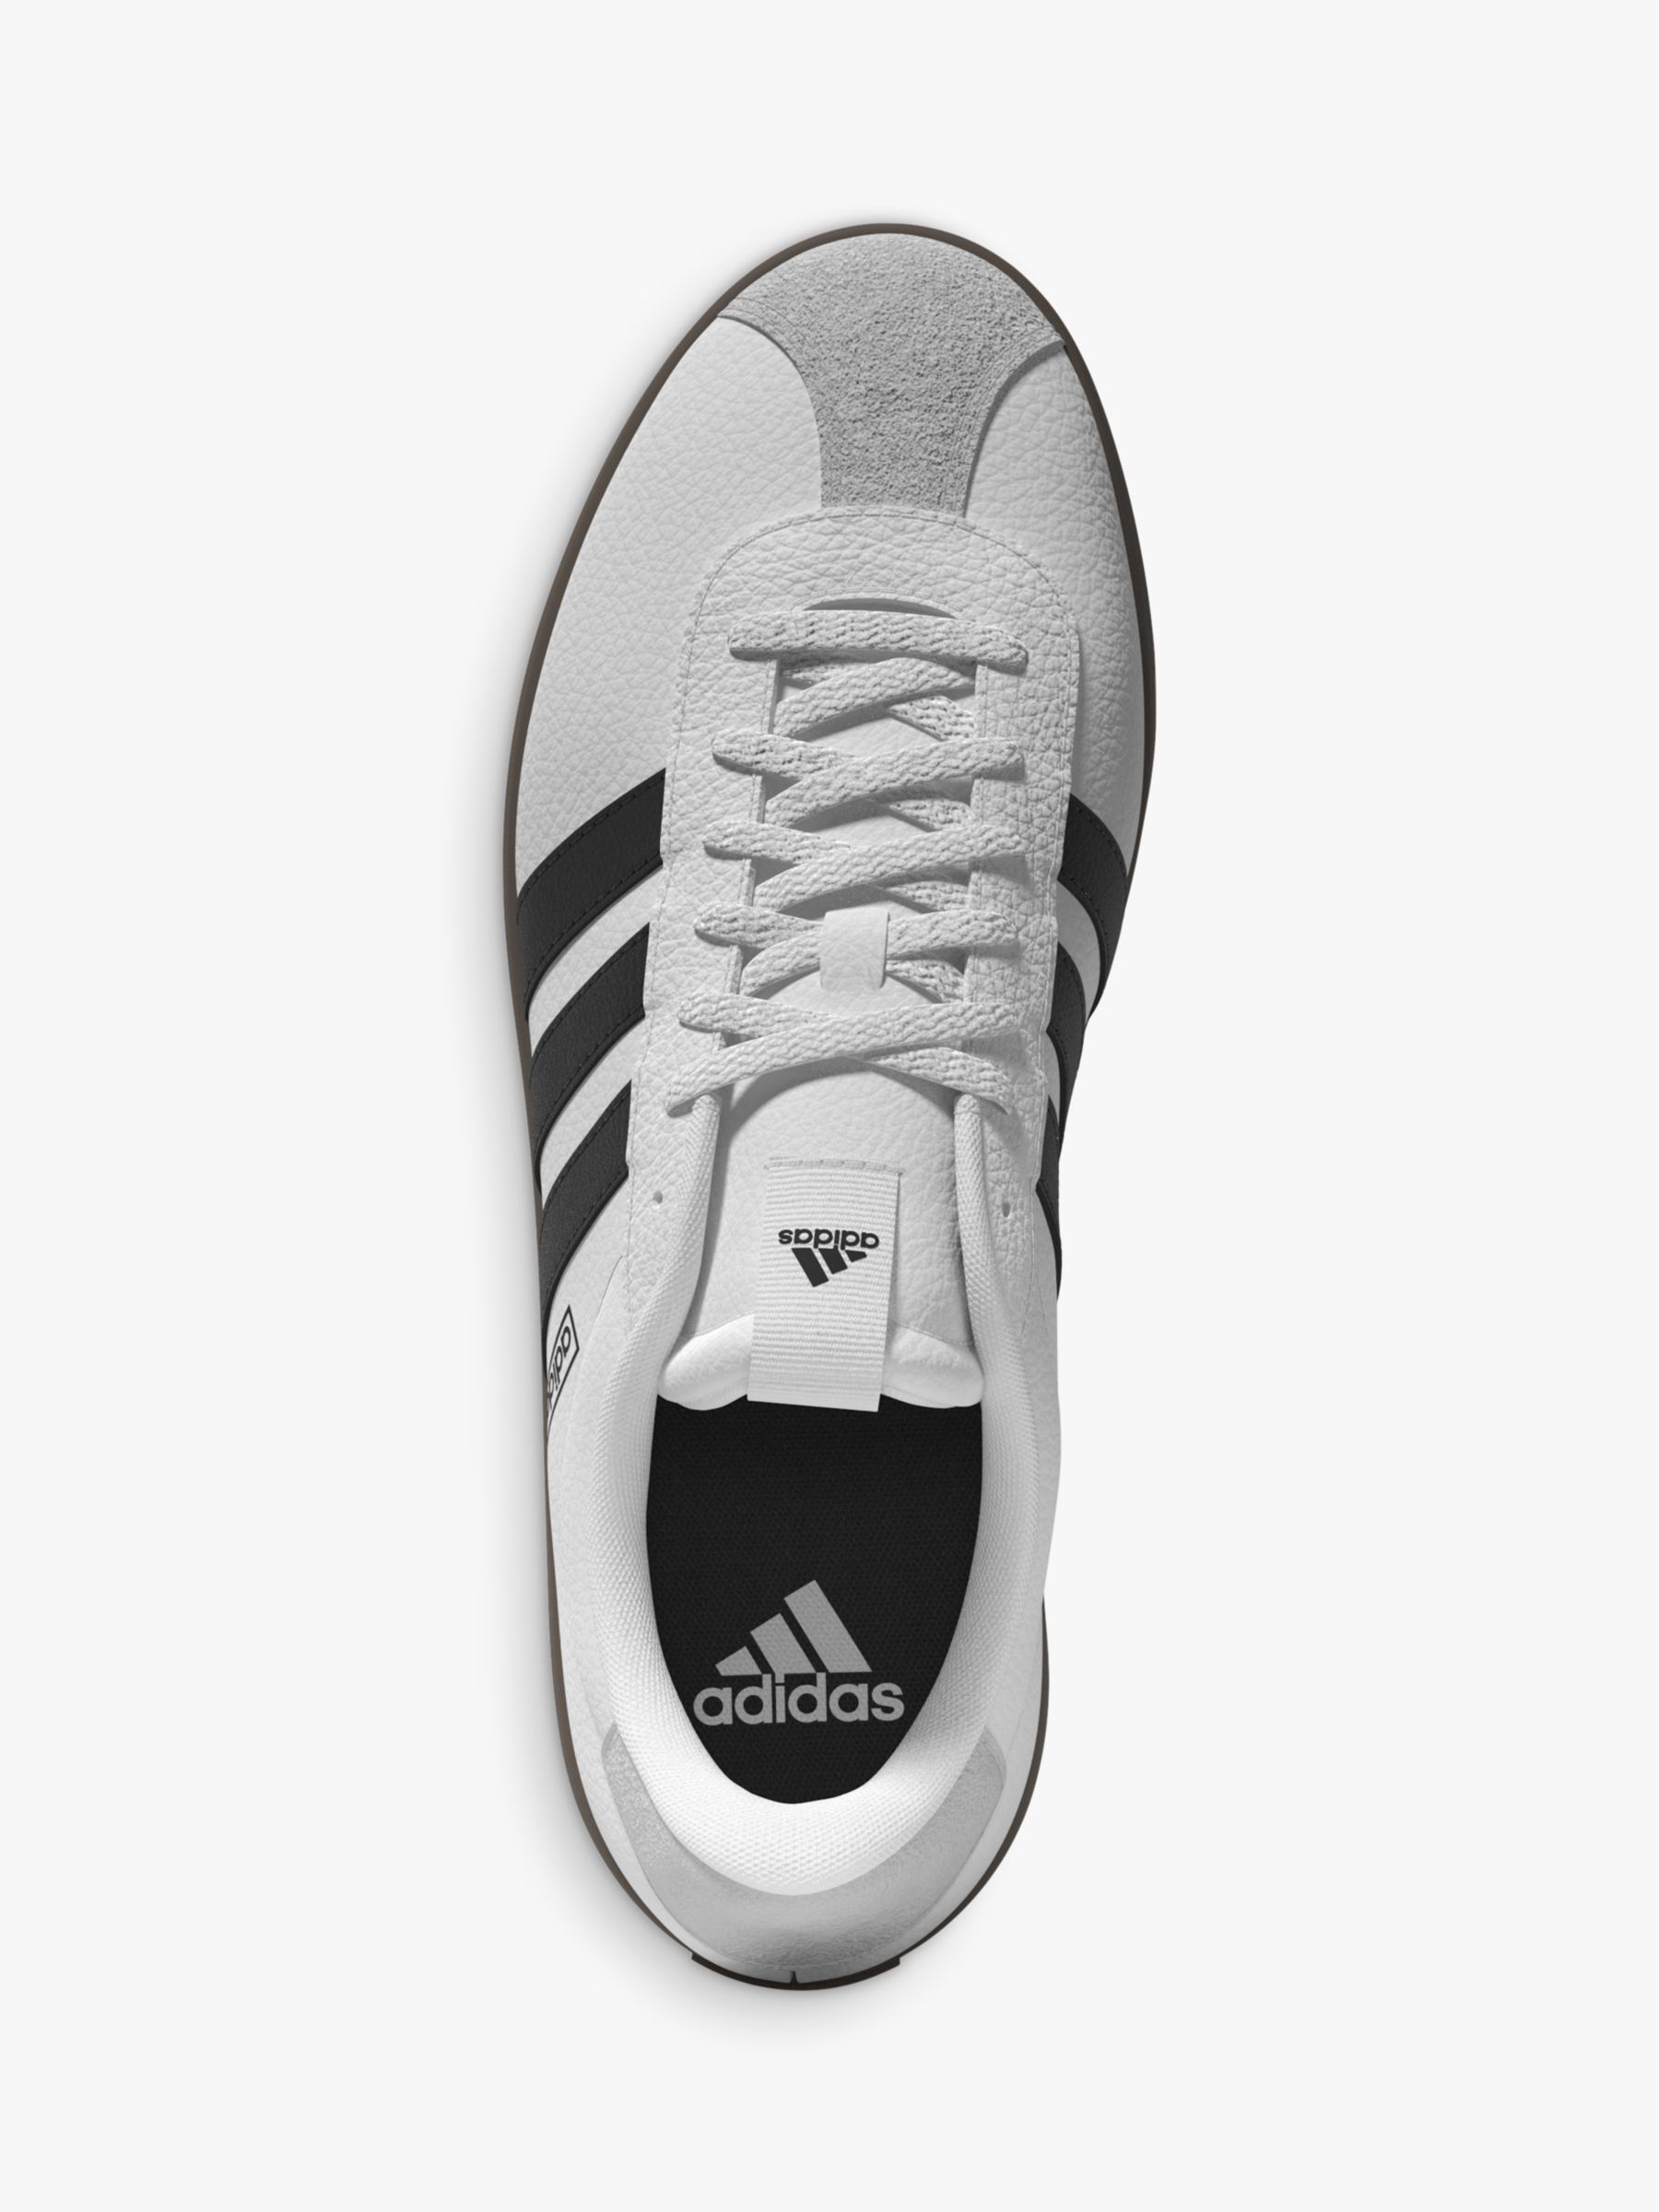 Buy adidas VL Court Contrast Sole Trainers Online at johnlewis.com